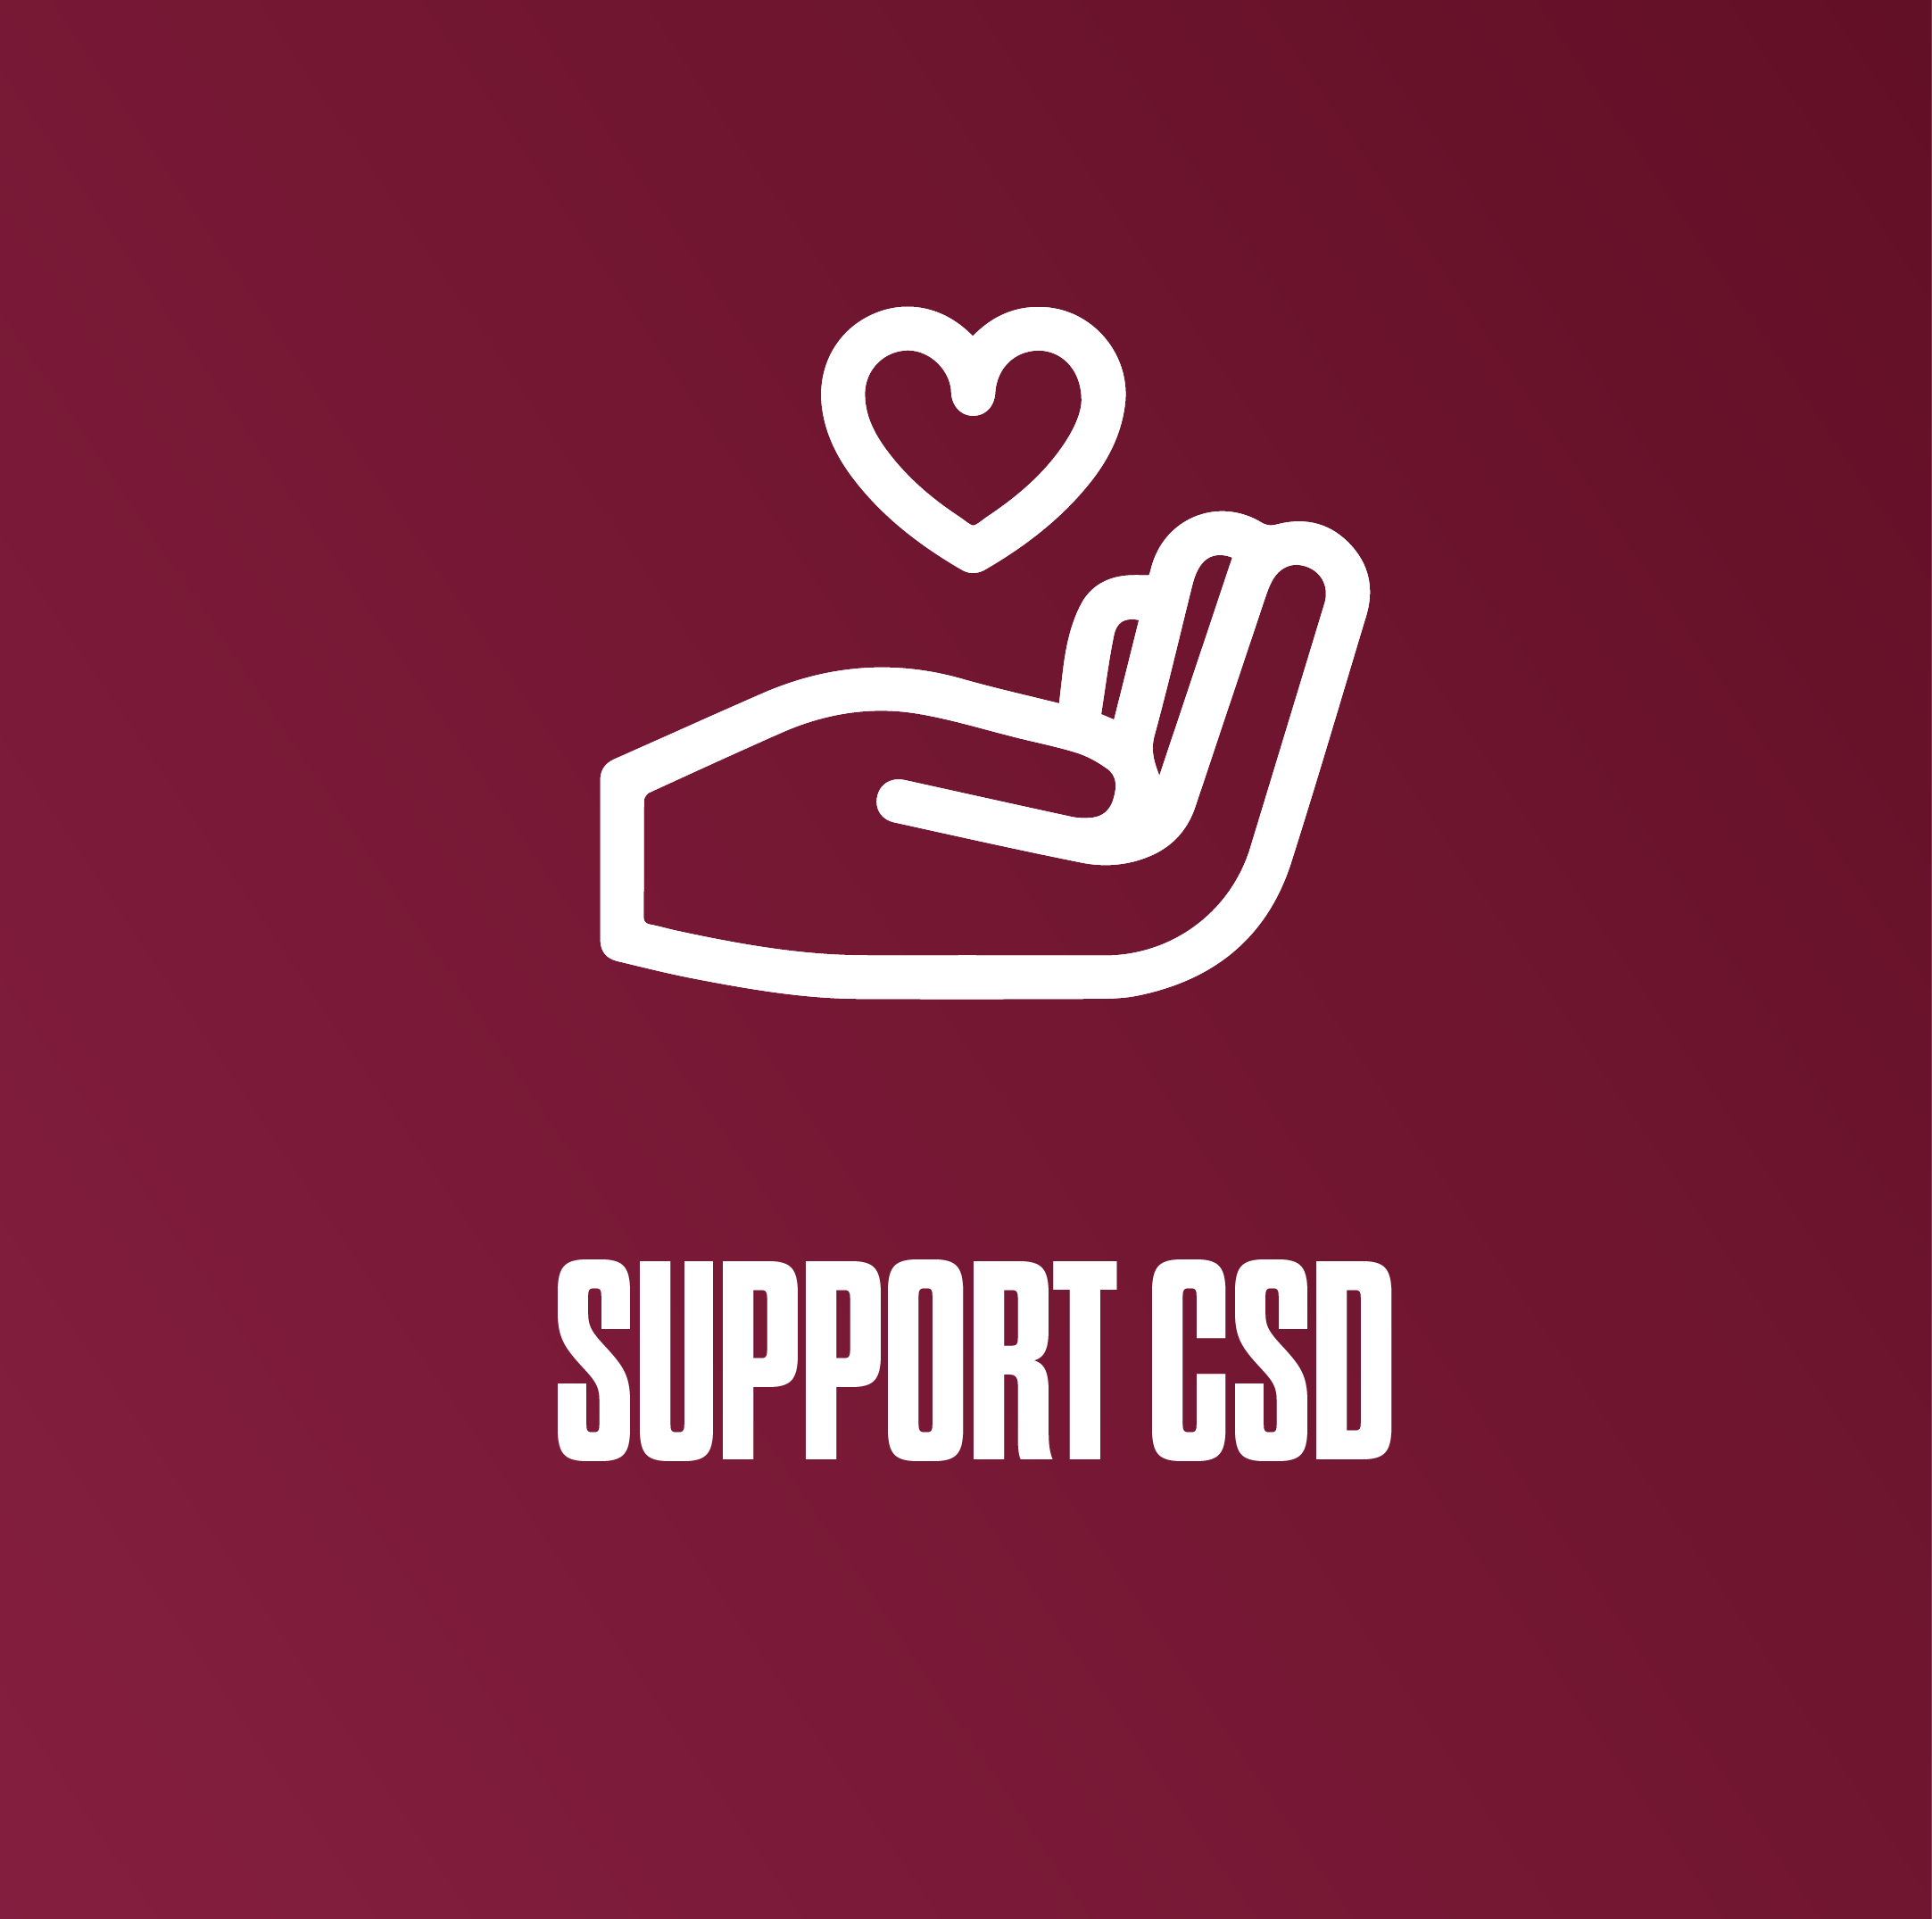 Support CSD